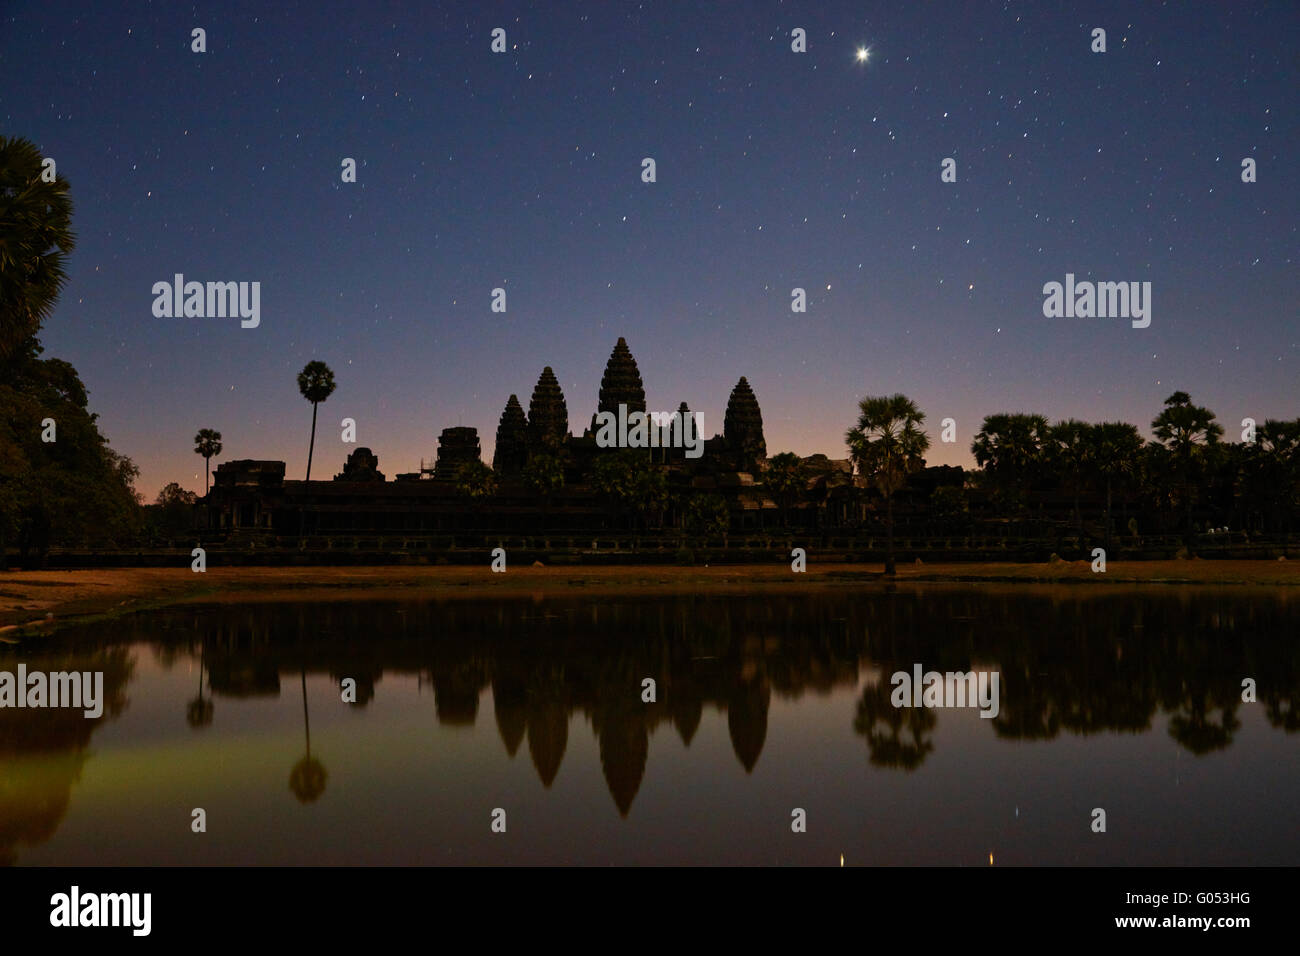 Stars and early dawn over Angkor Wat, Angkor World Heritage Site, Siem Reap, Cambodia Stock Photo